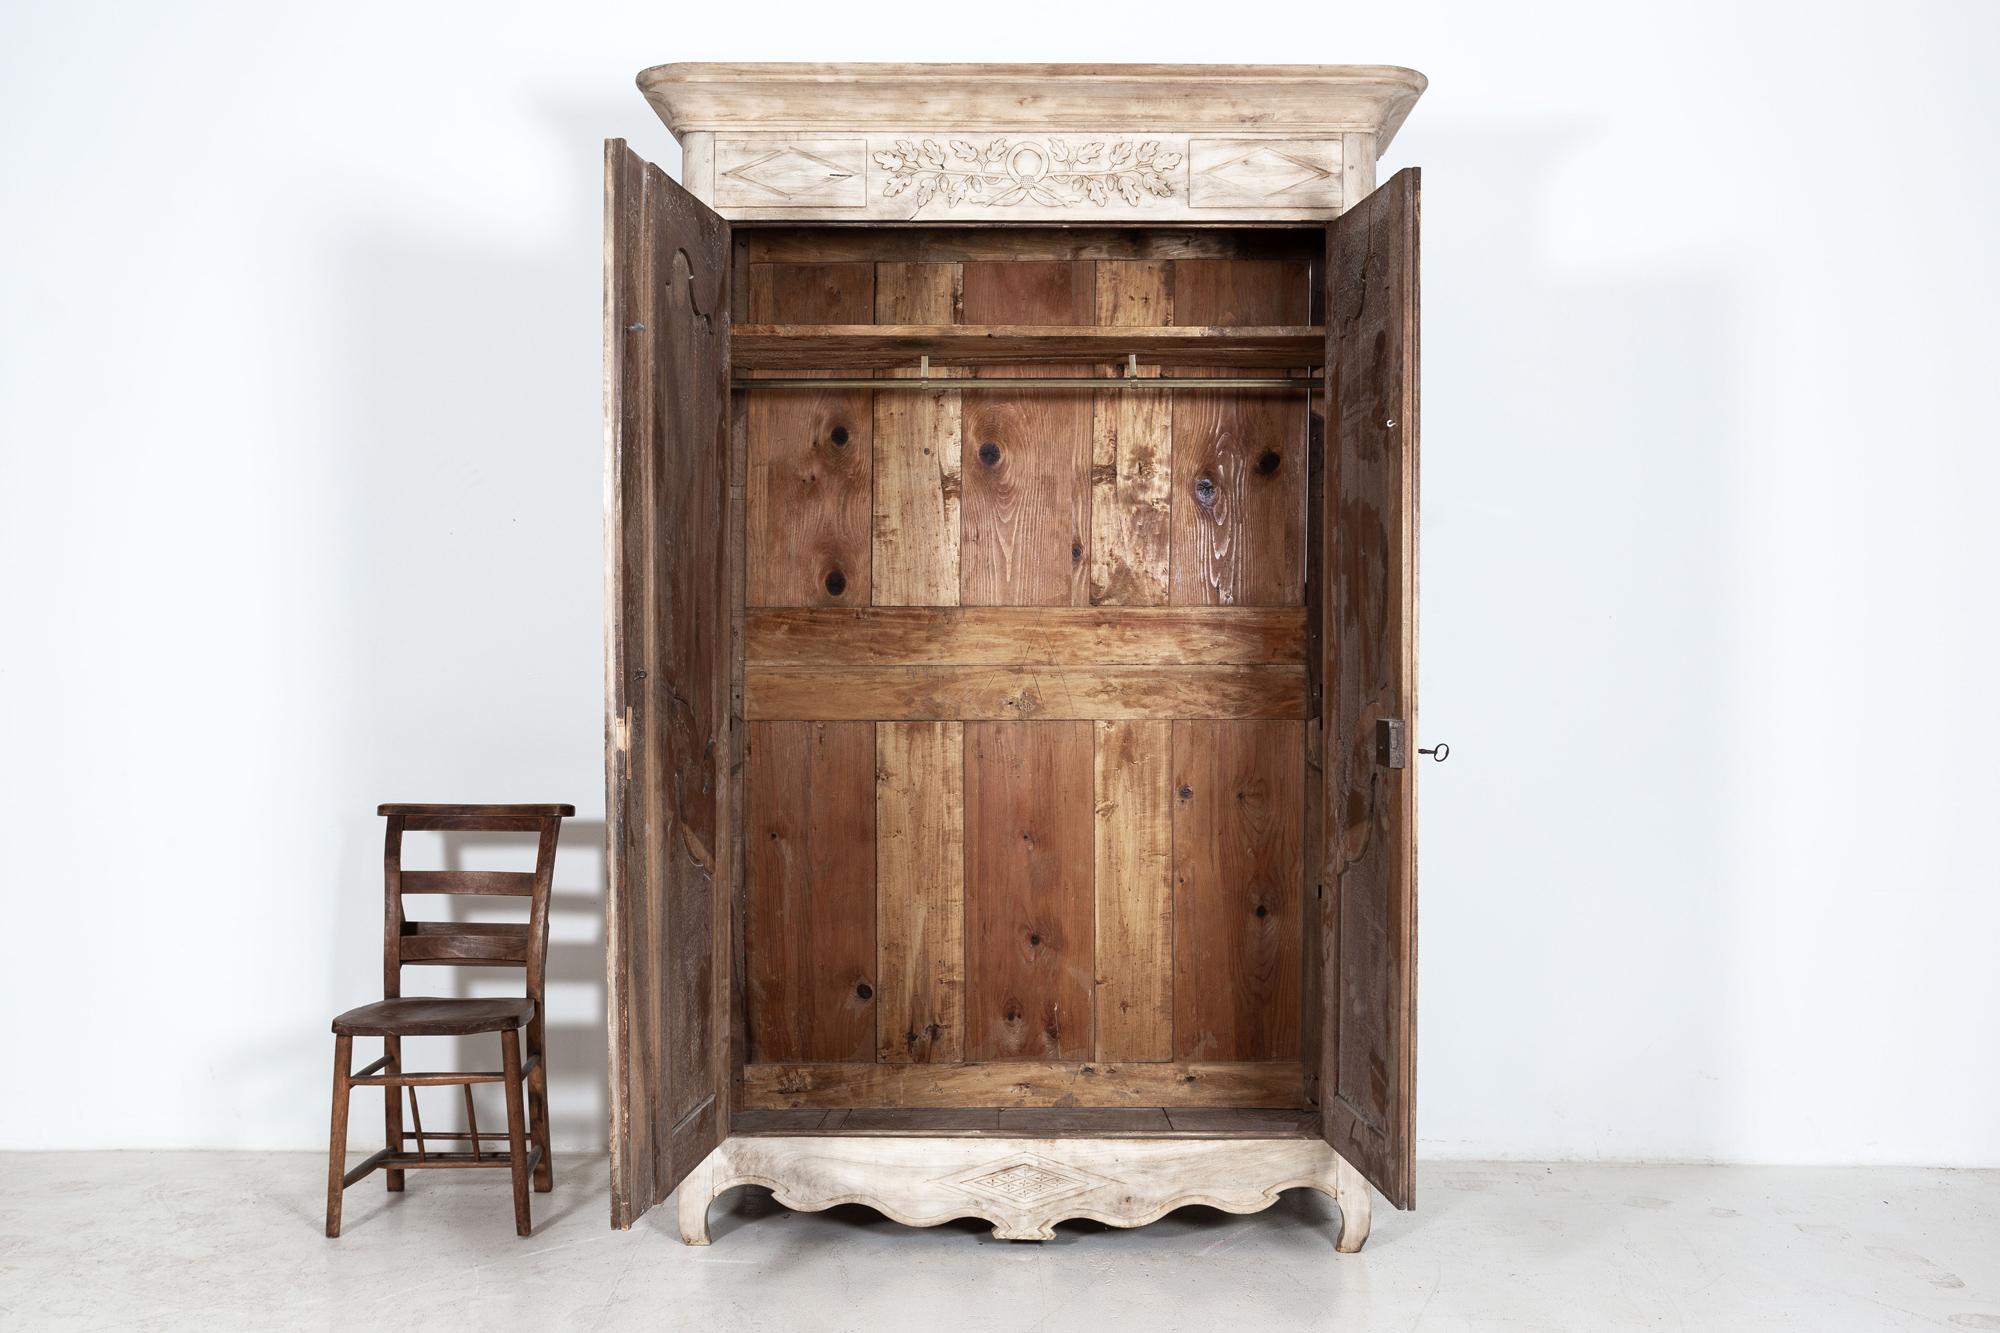 Circa 1740

Early 18thC French Bleached Walnut Provincial Armoire

With adjustable shelf, Hanging rail and key.

Sourced from the South of France

Sku 777

W155 x D56 x H228